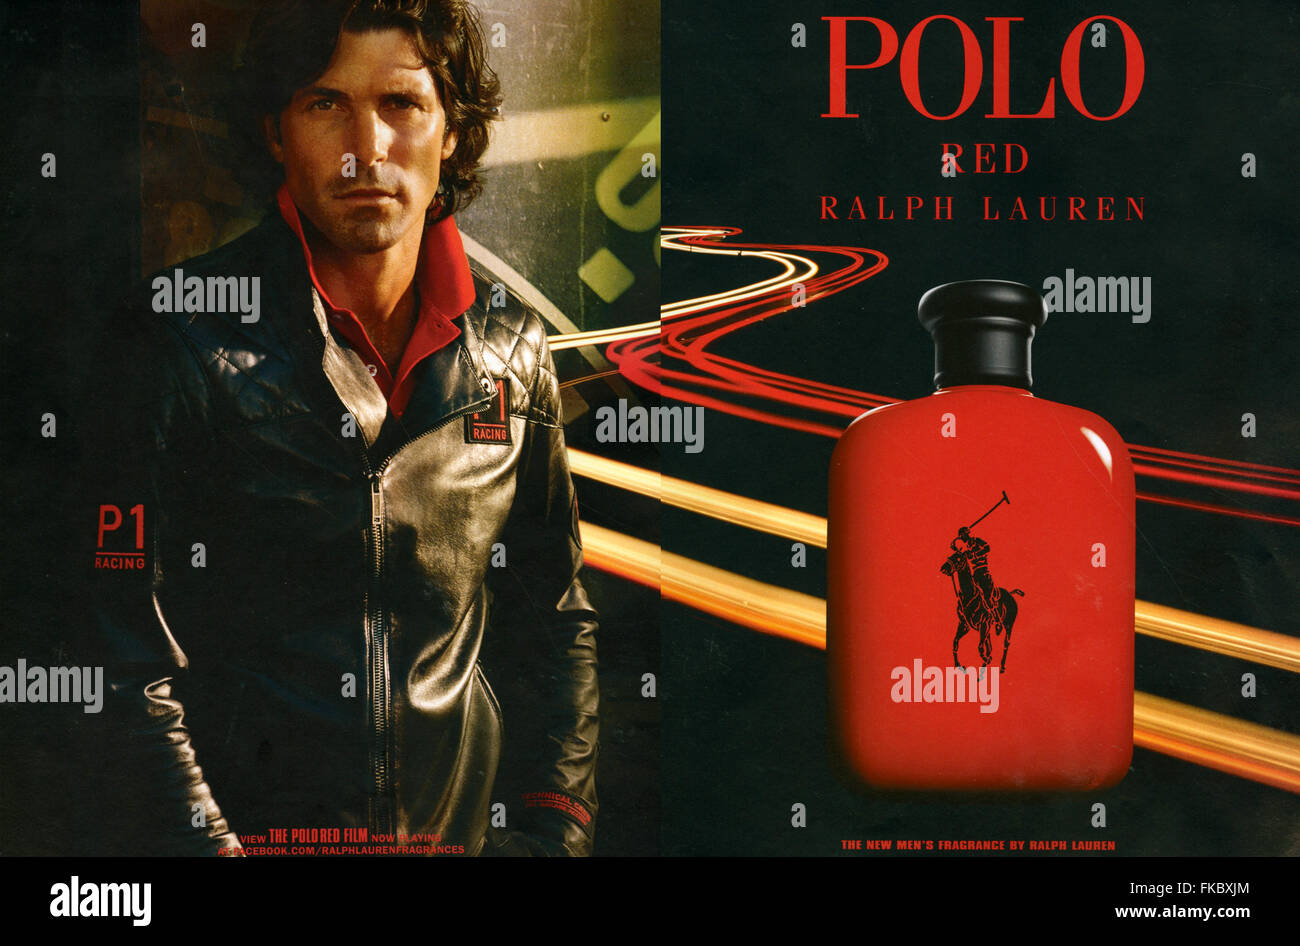 polo red advert